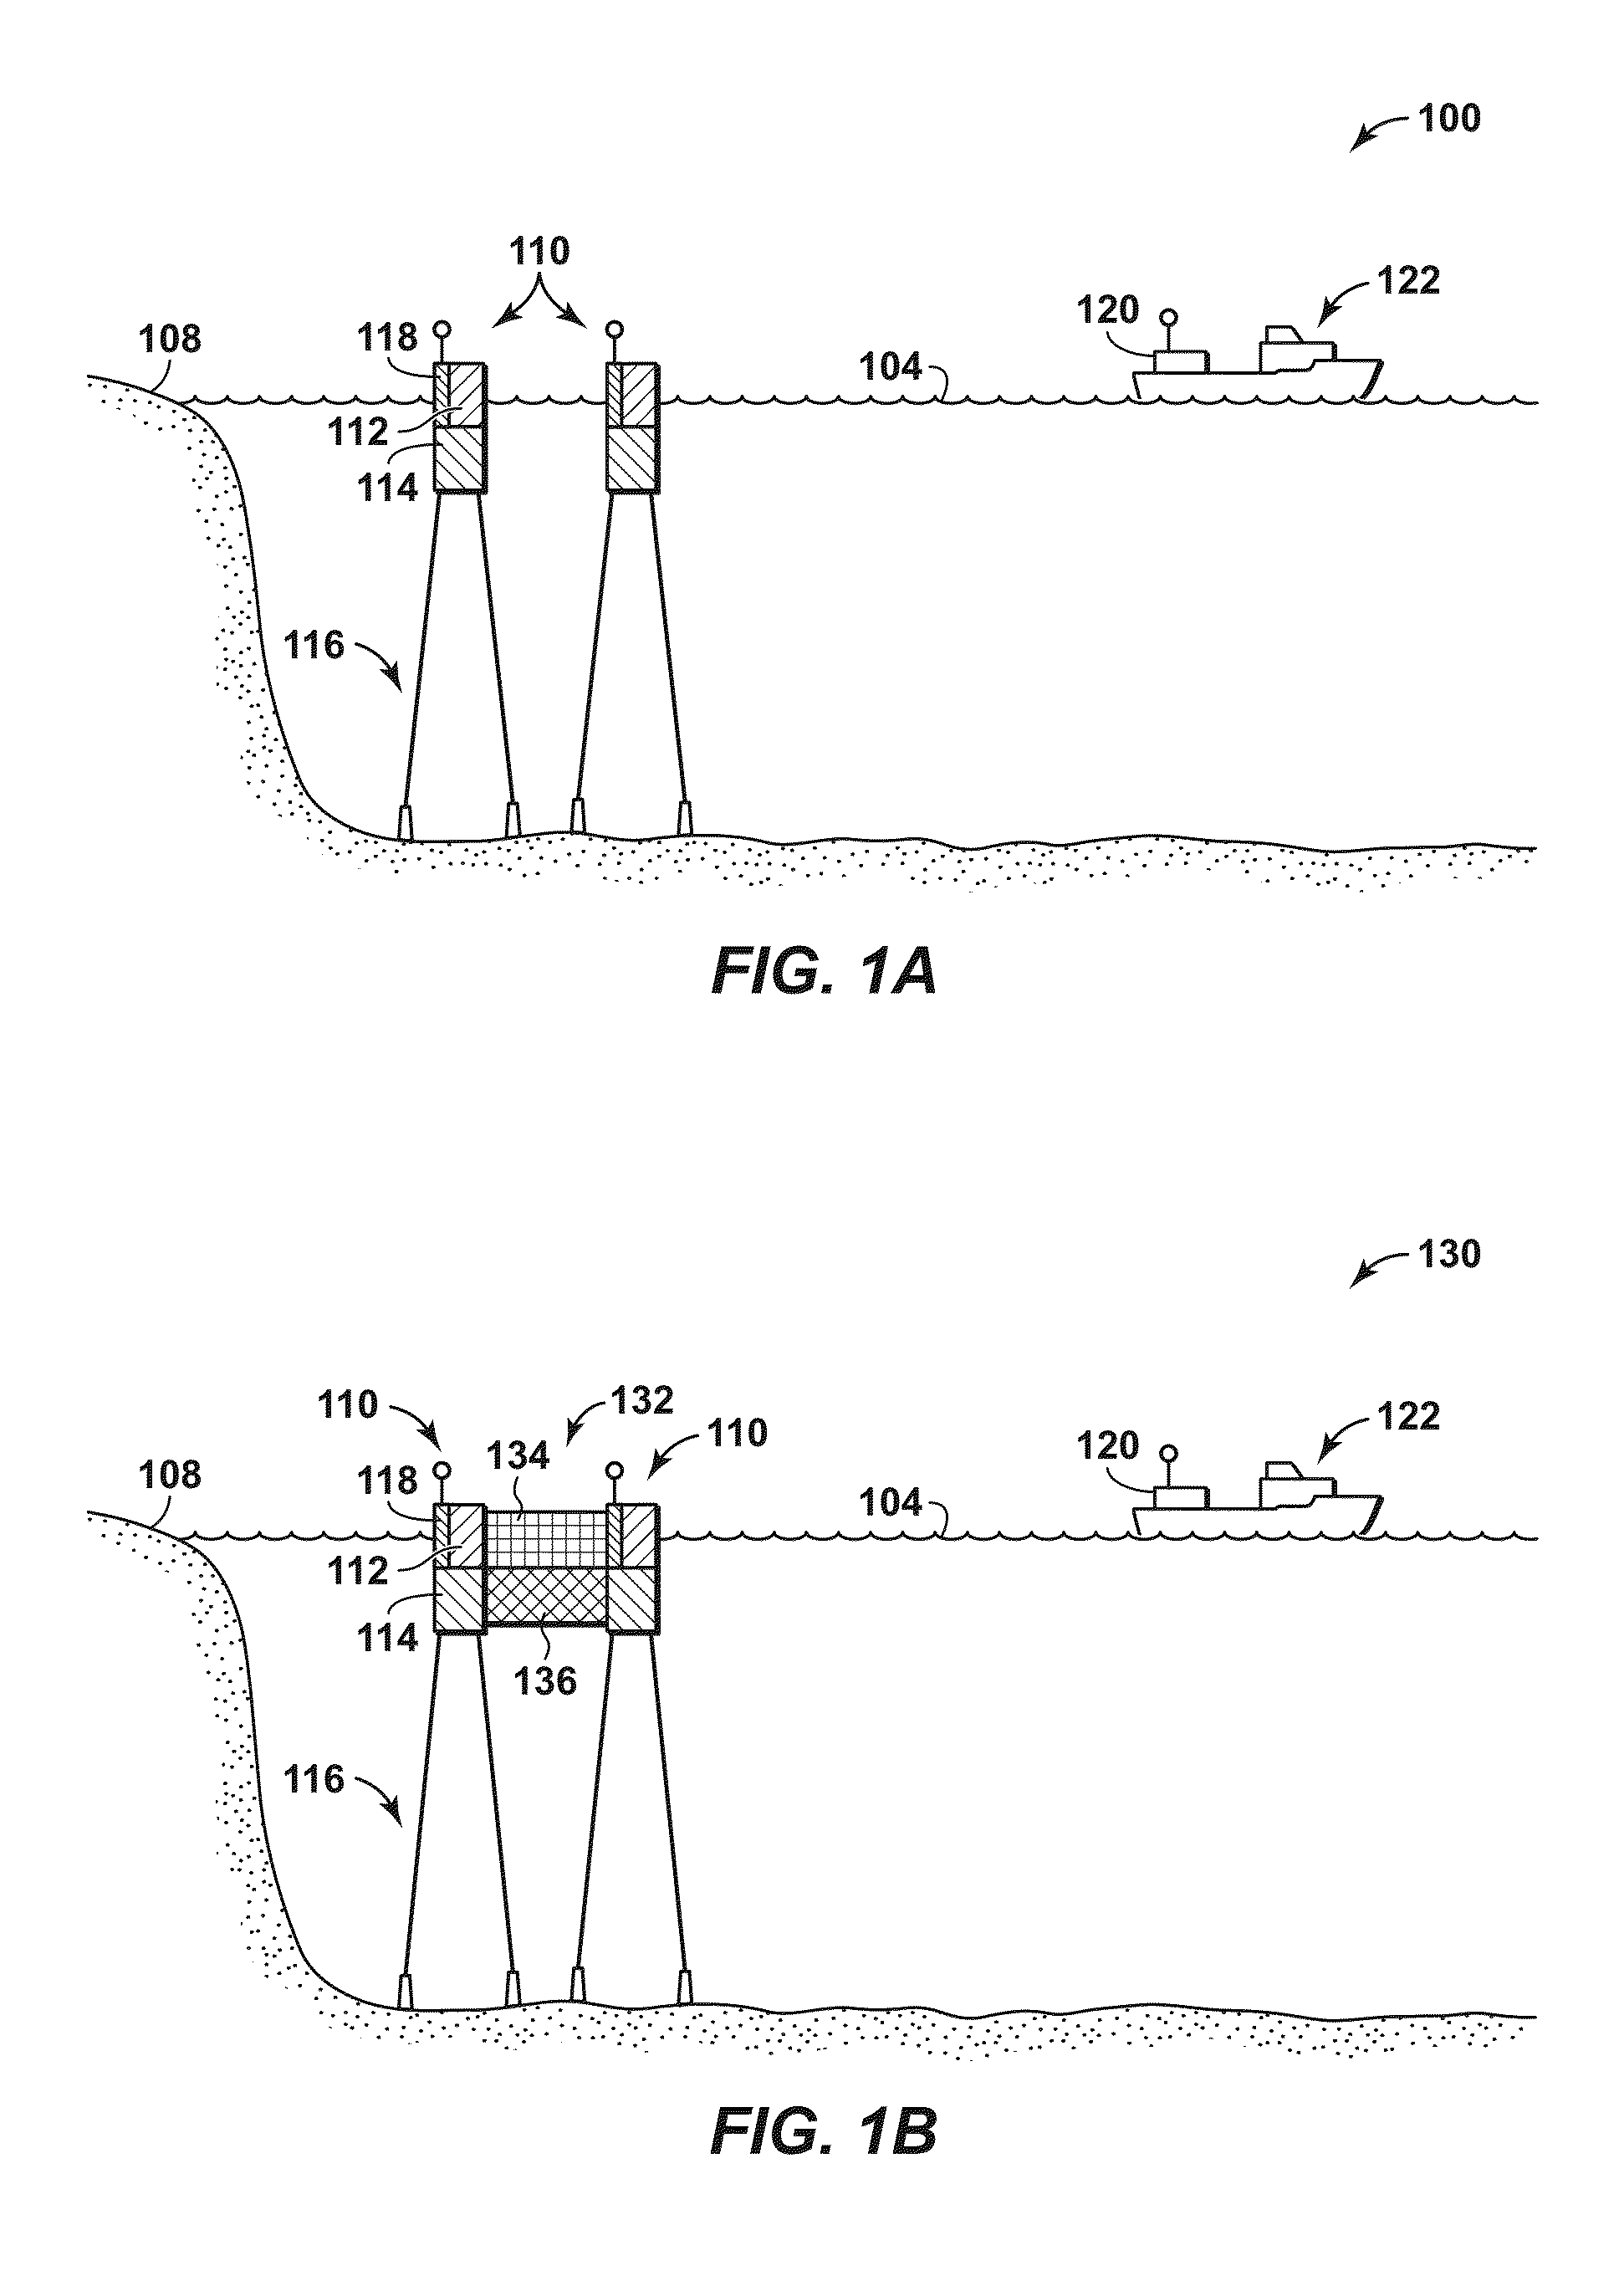 Method and system for identifying and sampling hydrocarbons with buoys